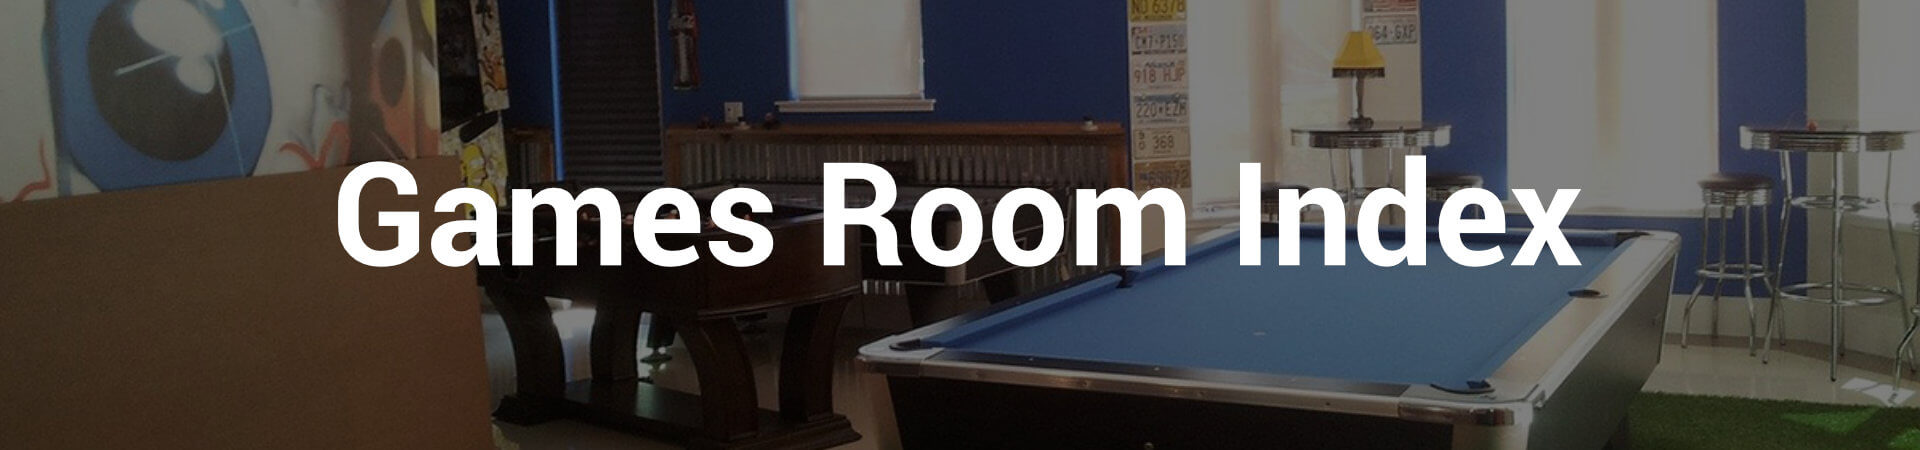 Games Room - Hints and Things